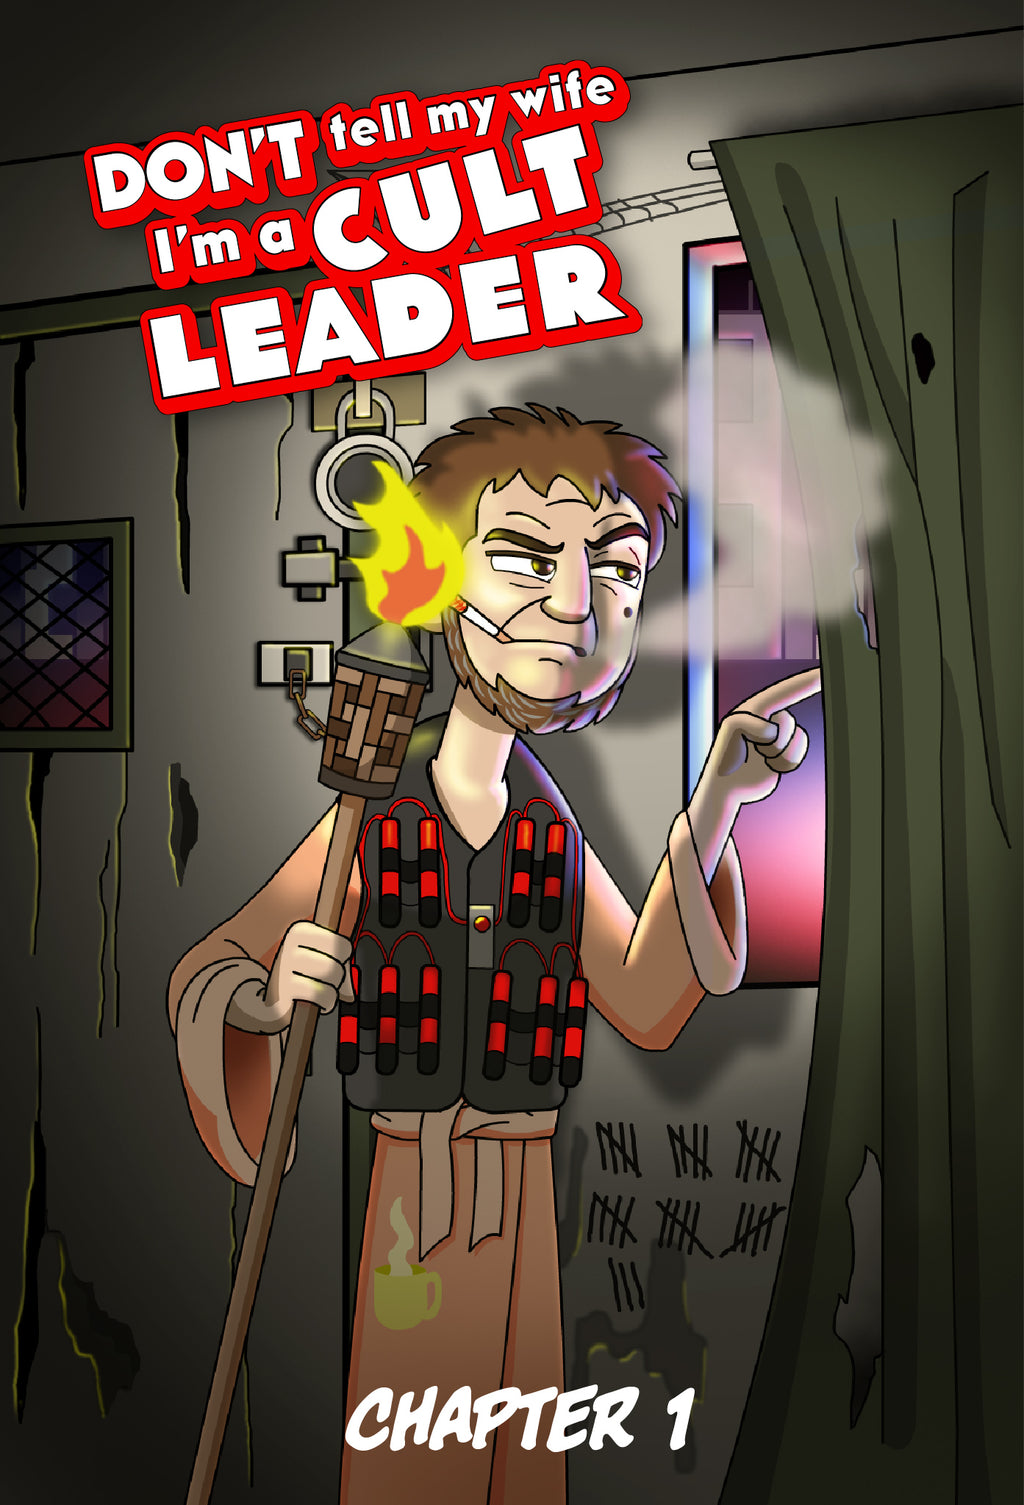 Cover of Chapter 1 of Don't Tell My Wife I'm a Cult Leader. We see Floyd Landers peeking outside a curtain while smoking a cigarette and holding a Tiki torch.